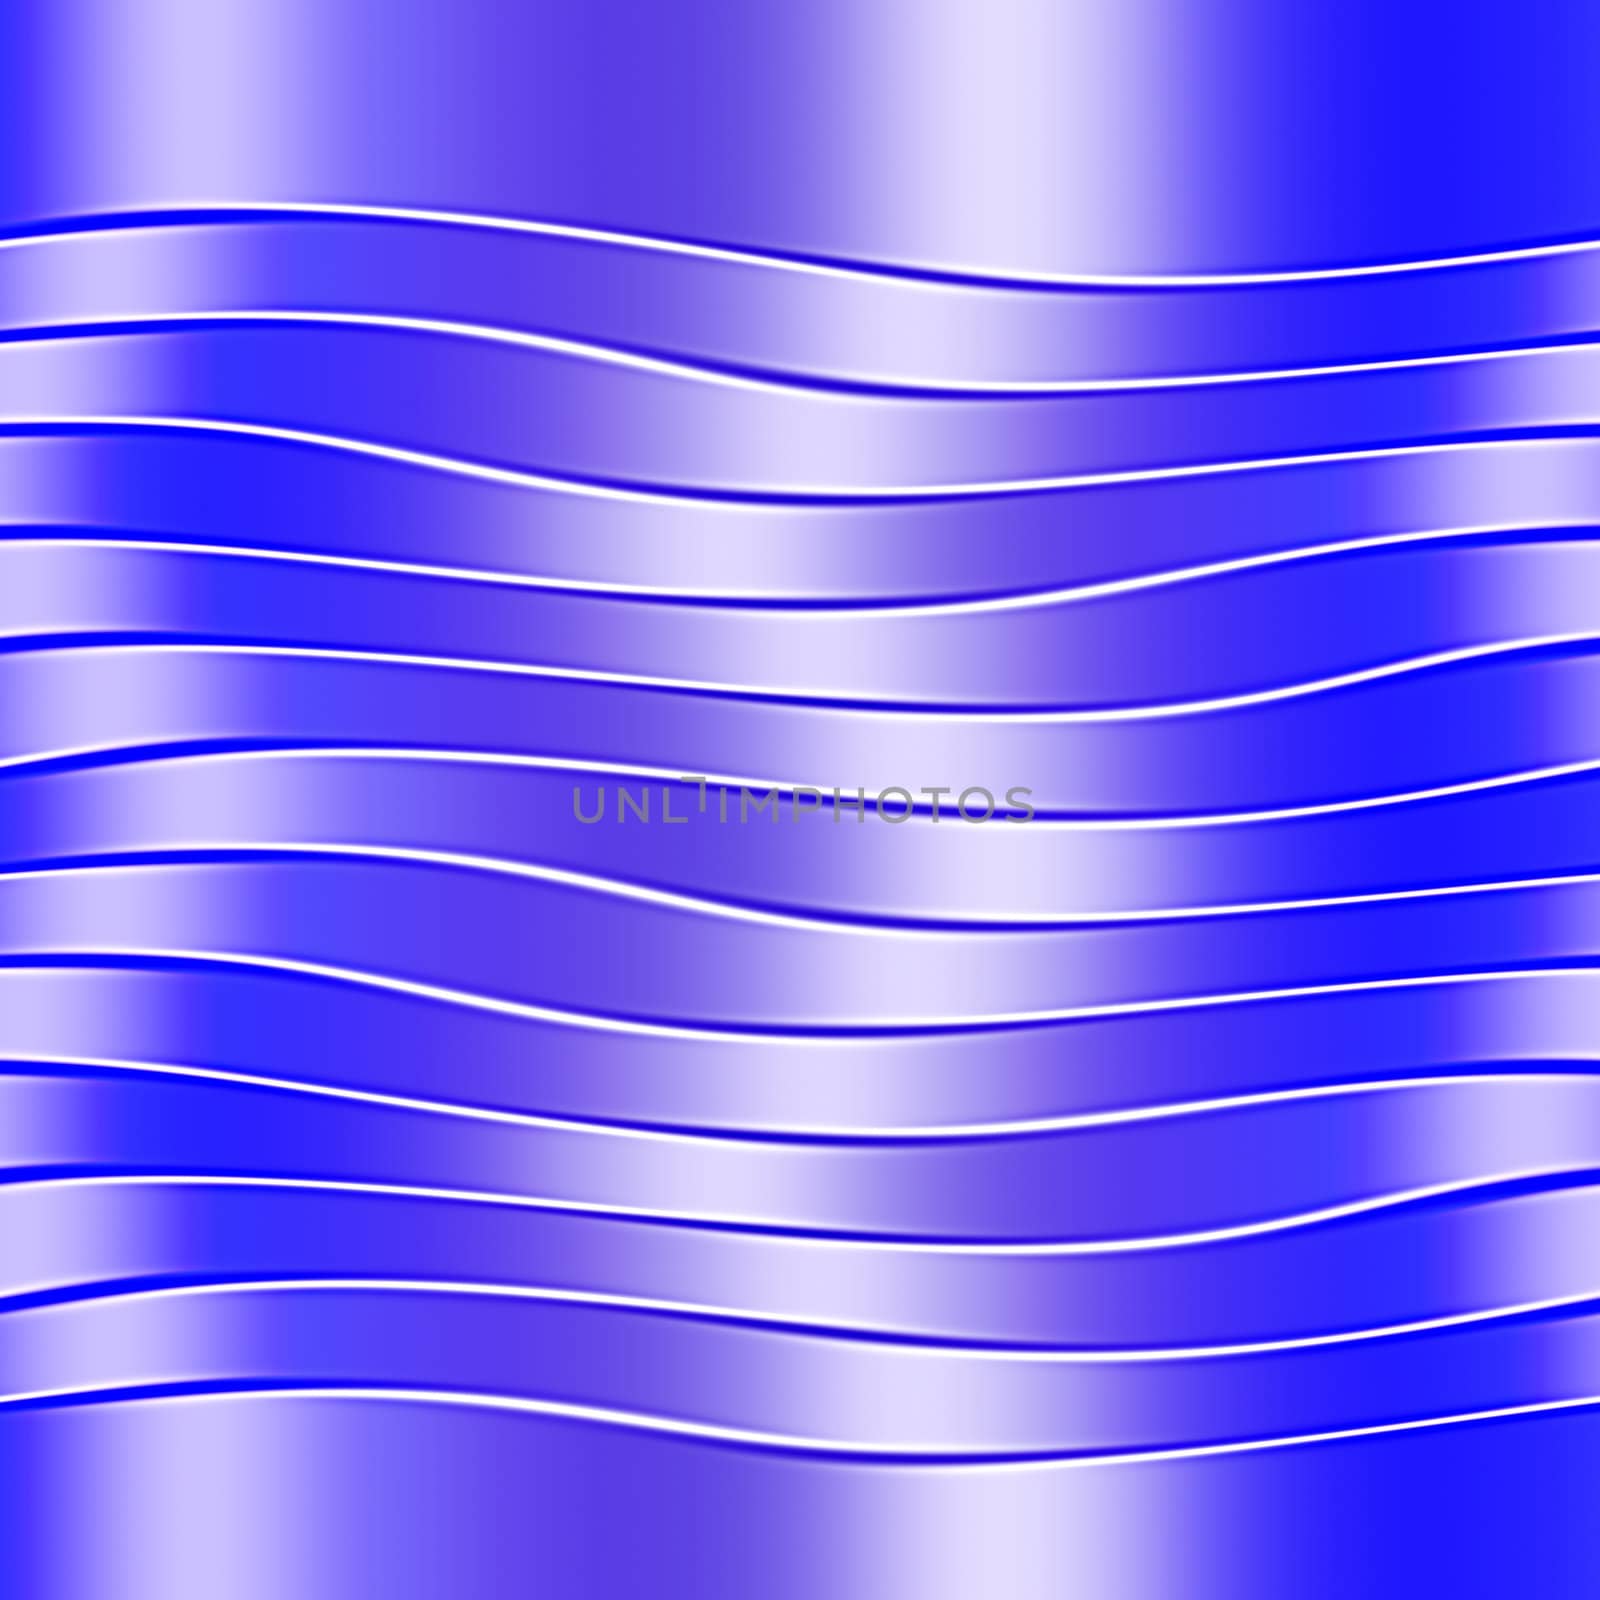 wavy stripes background, will tile seamlessly as a pattern